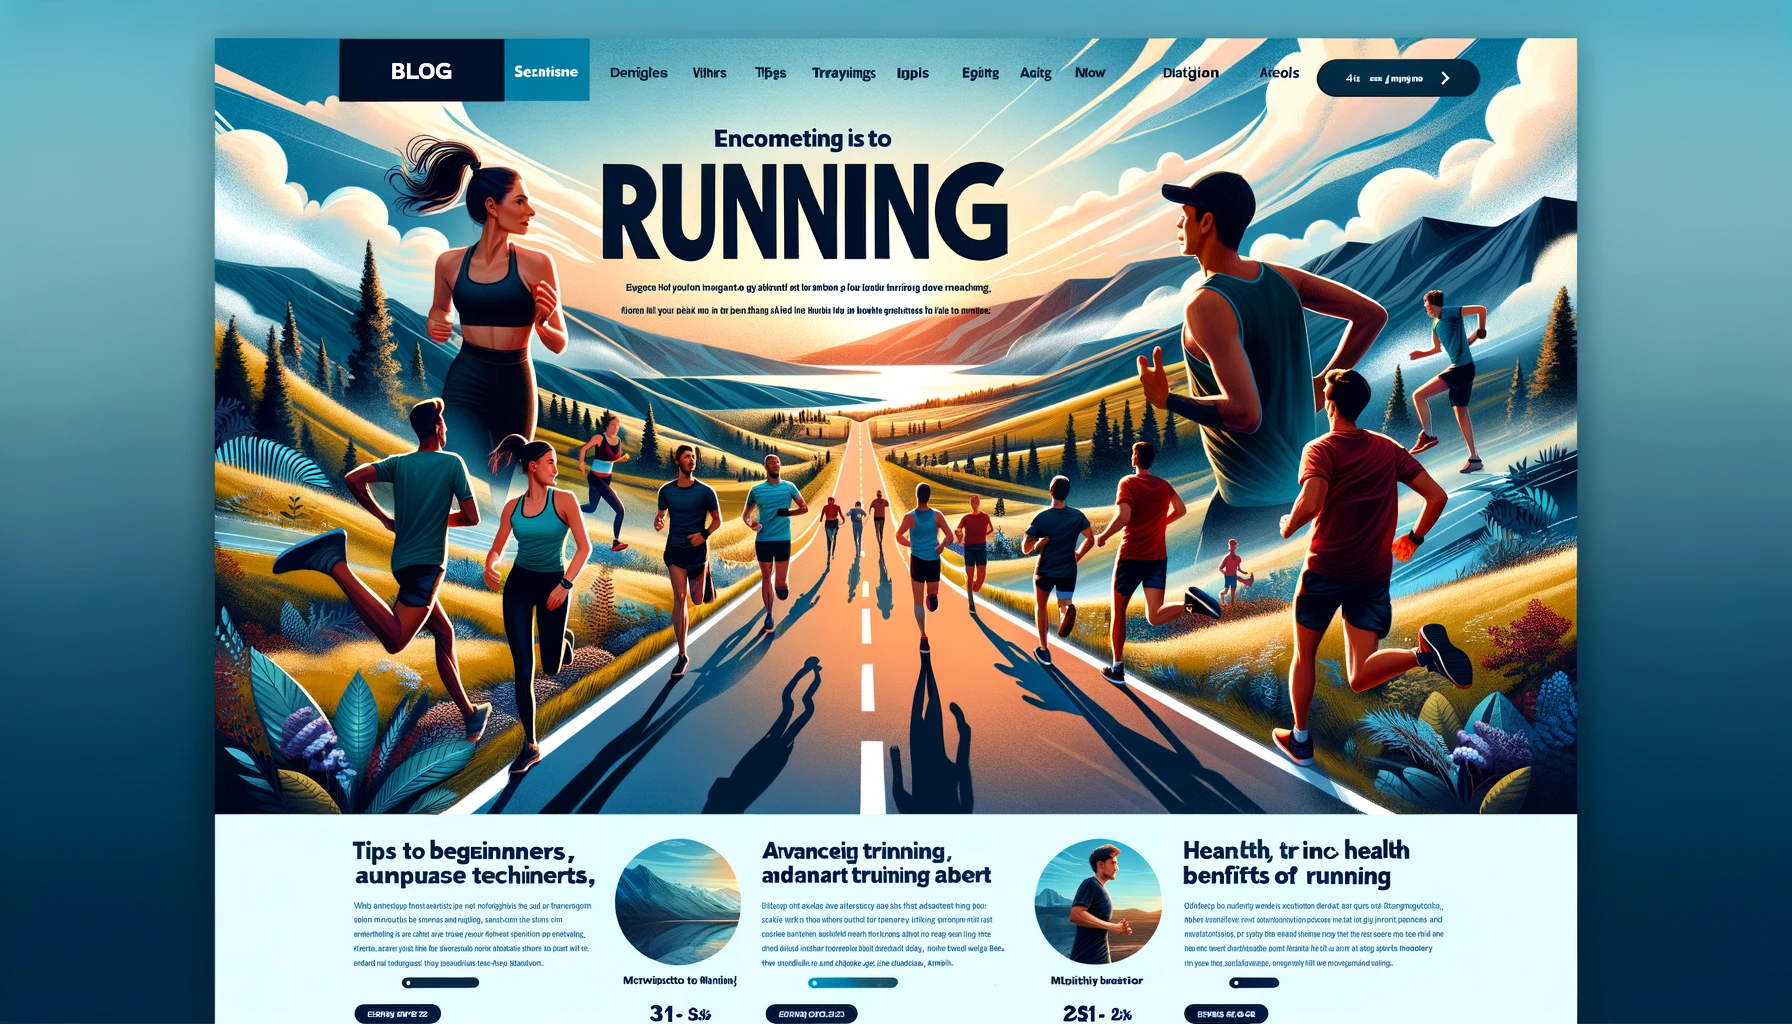 Digital artwork showcasing a concept for a running blog. The image features a sleek, modern interface with a large, vibrant image of a runner in motion, set against a blurred natural backdrop. Key web